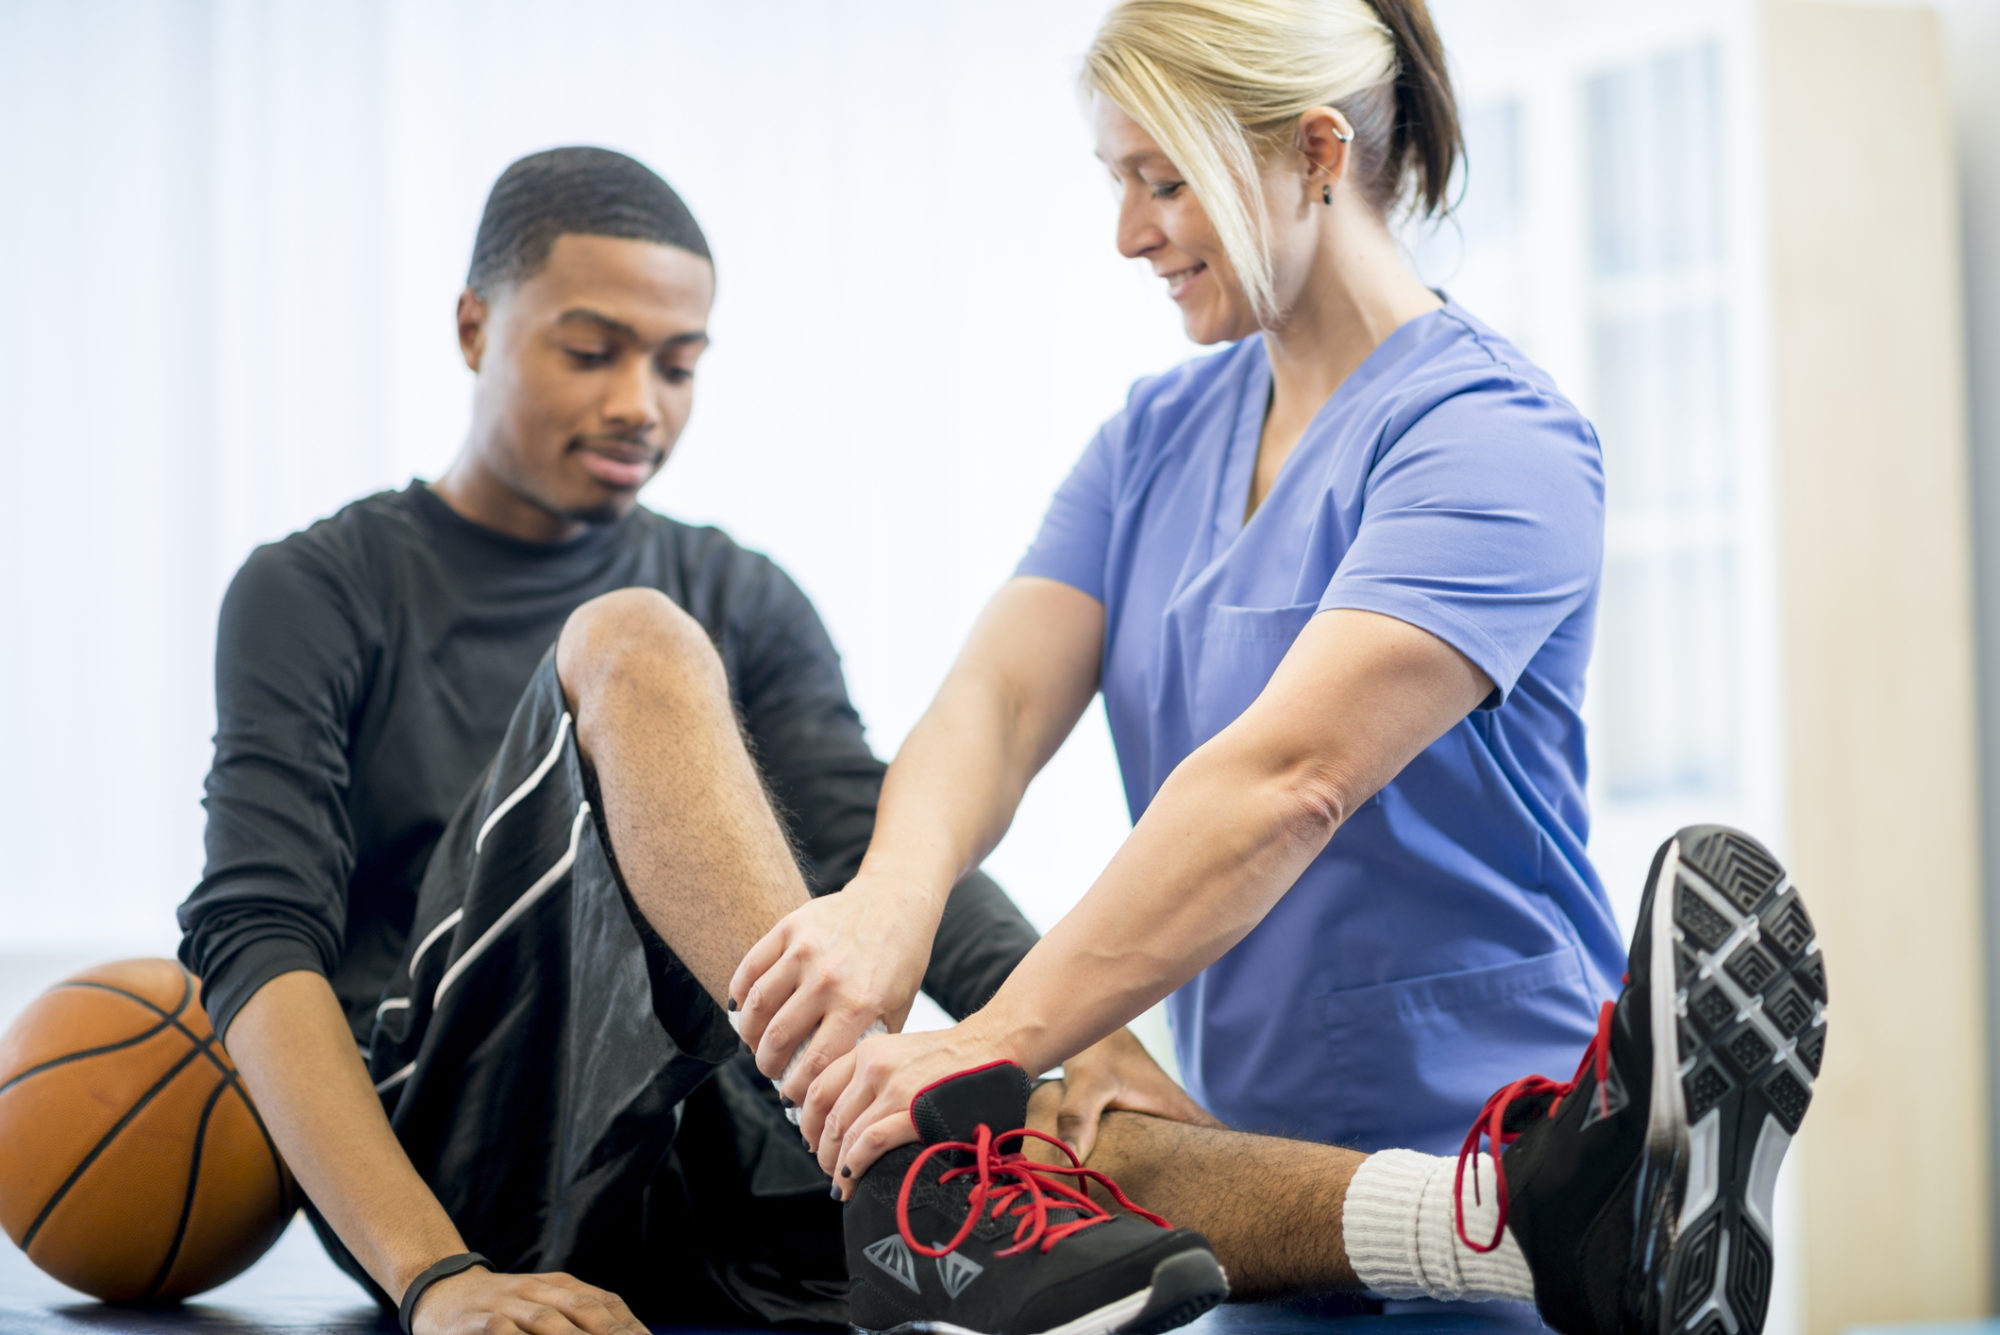 Before getting out on the field or the court, make sure your children have had their sports physicals